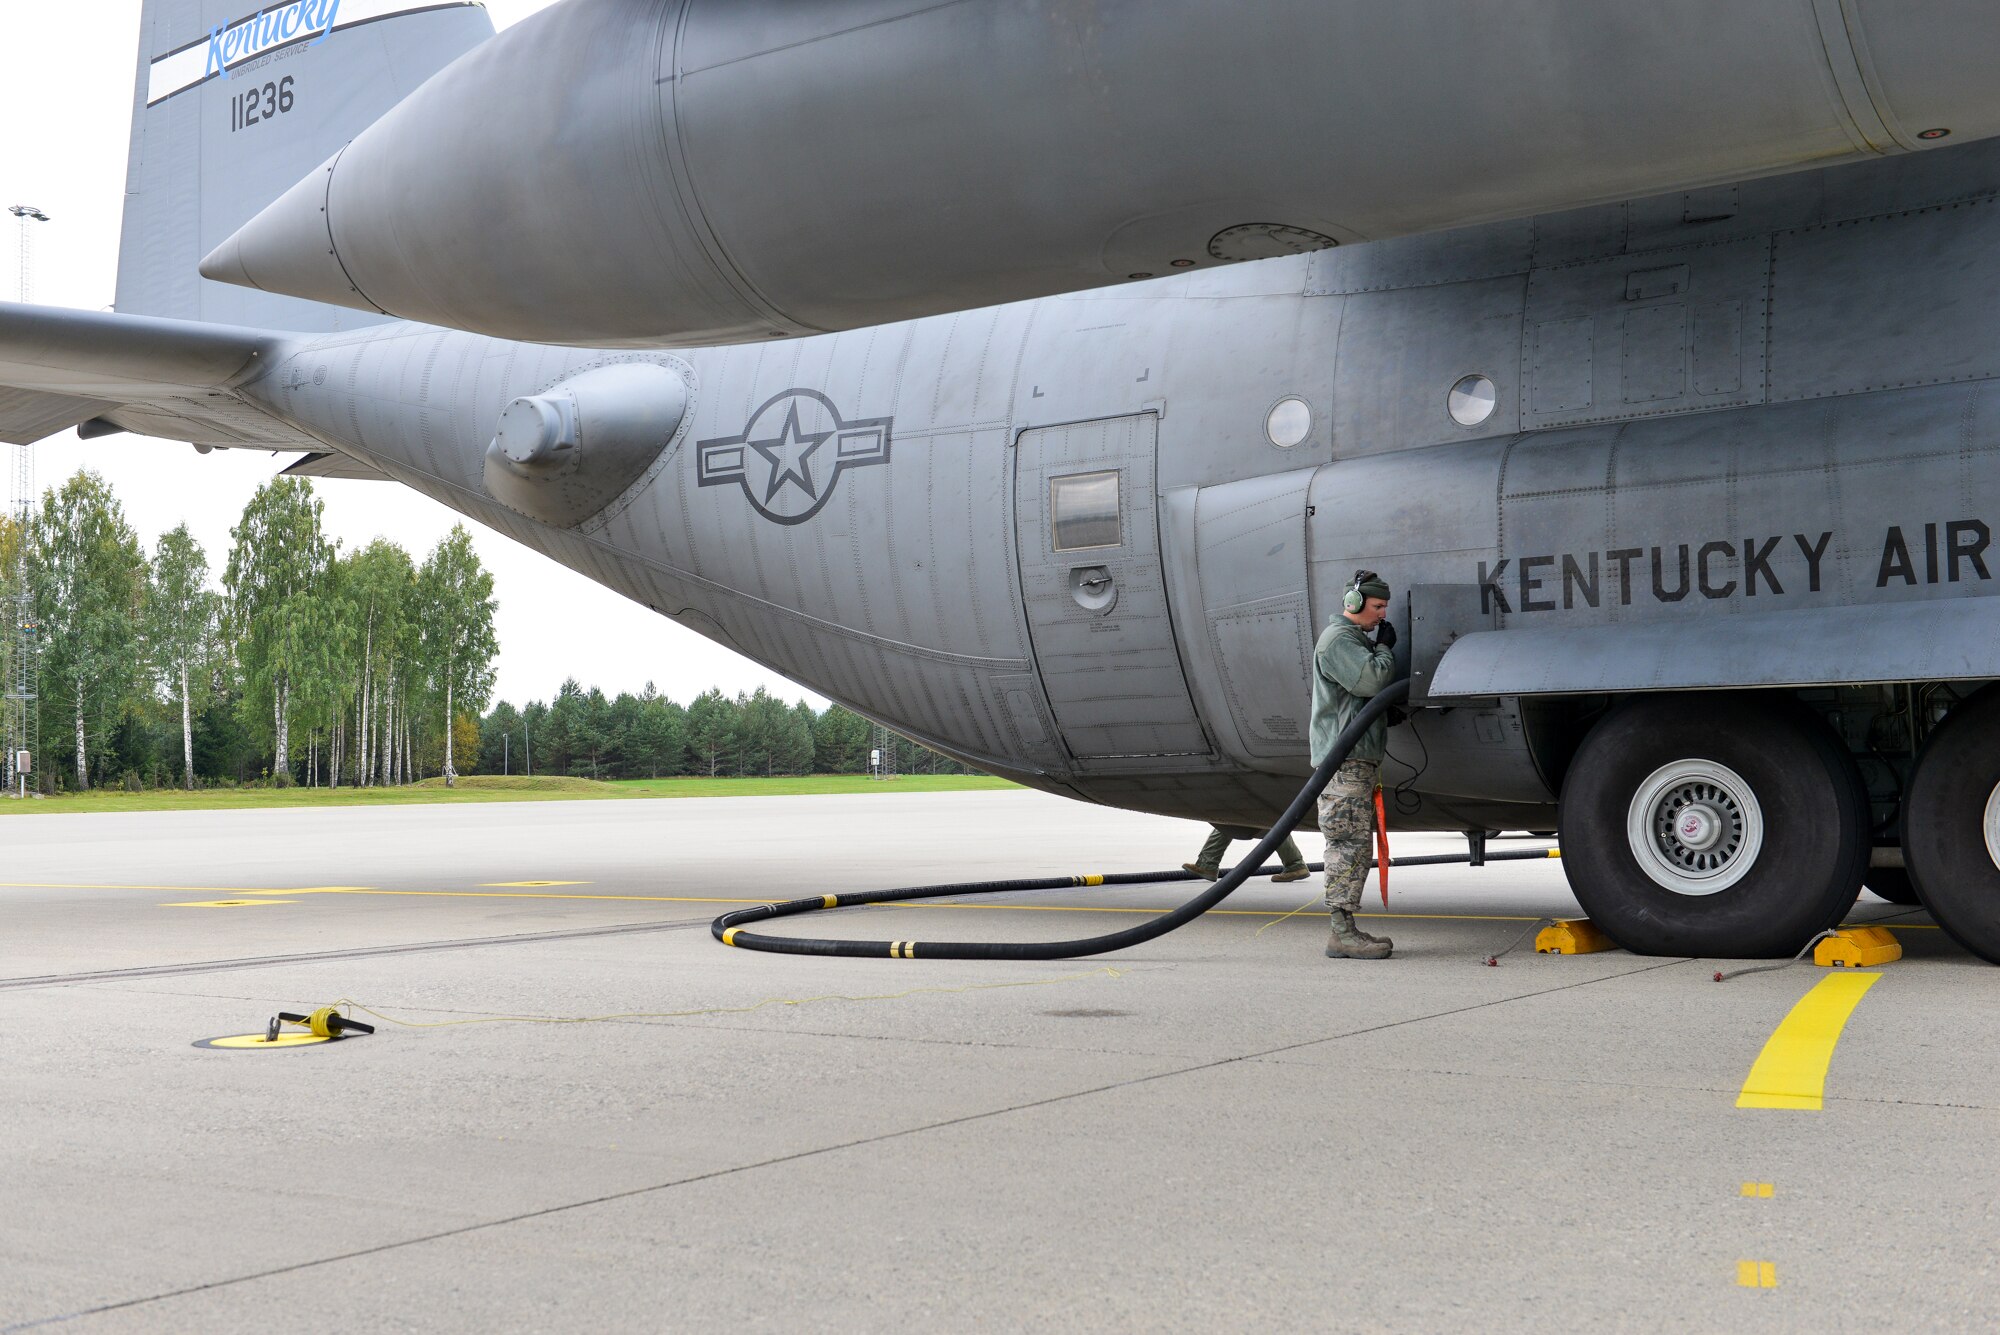 U.S. Air Force Master Sgt. Greg Howard, a crew chief from the Kentucky Air National Guard’s 123rd Maintenance Squadron, refuels a C-130H aircraft prior to take off Sept. 23, 2014, at Gardermoen Military Air Station in Oslo, Norway. Howard and Airmen from the Kentucky Air Guard’s 123rd Airlift Wing provided airlift support to the 82nd Airborne Division during Operation Noble Ledger. (U.S. Air National Guard photo by Master Sgt. Charles Delano)